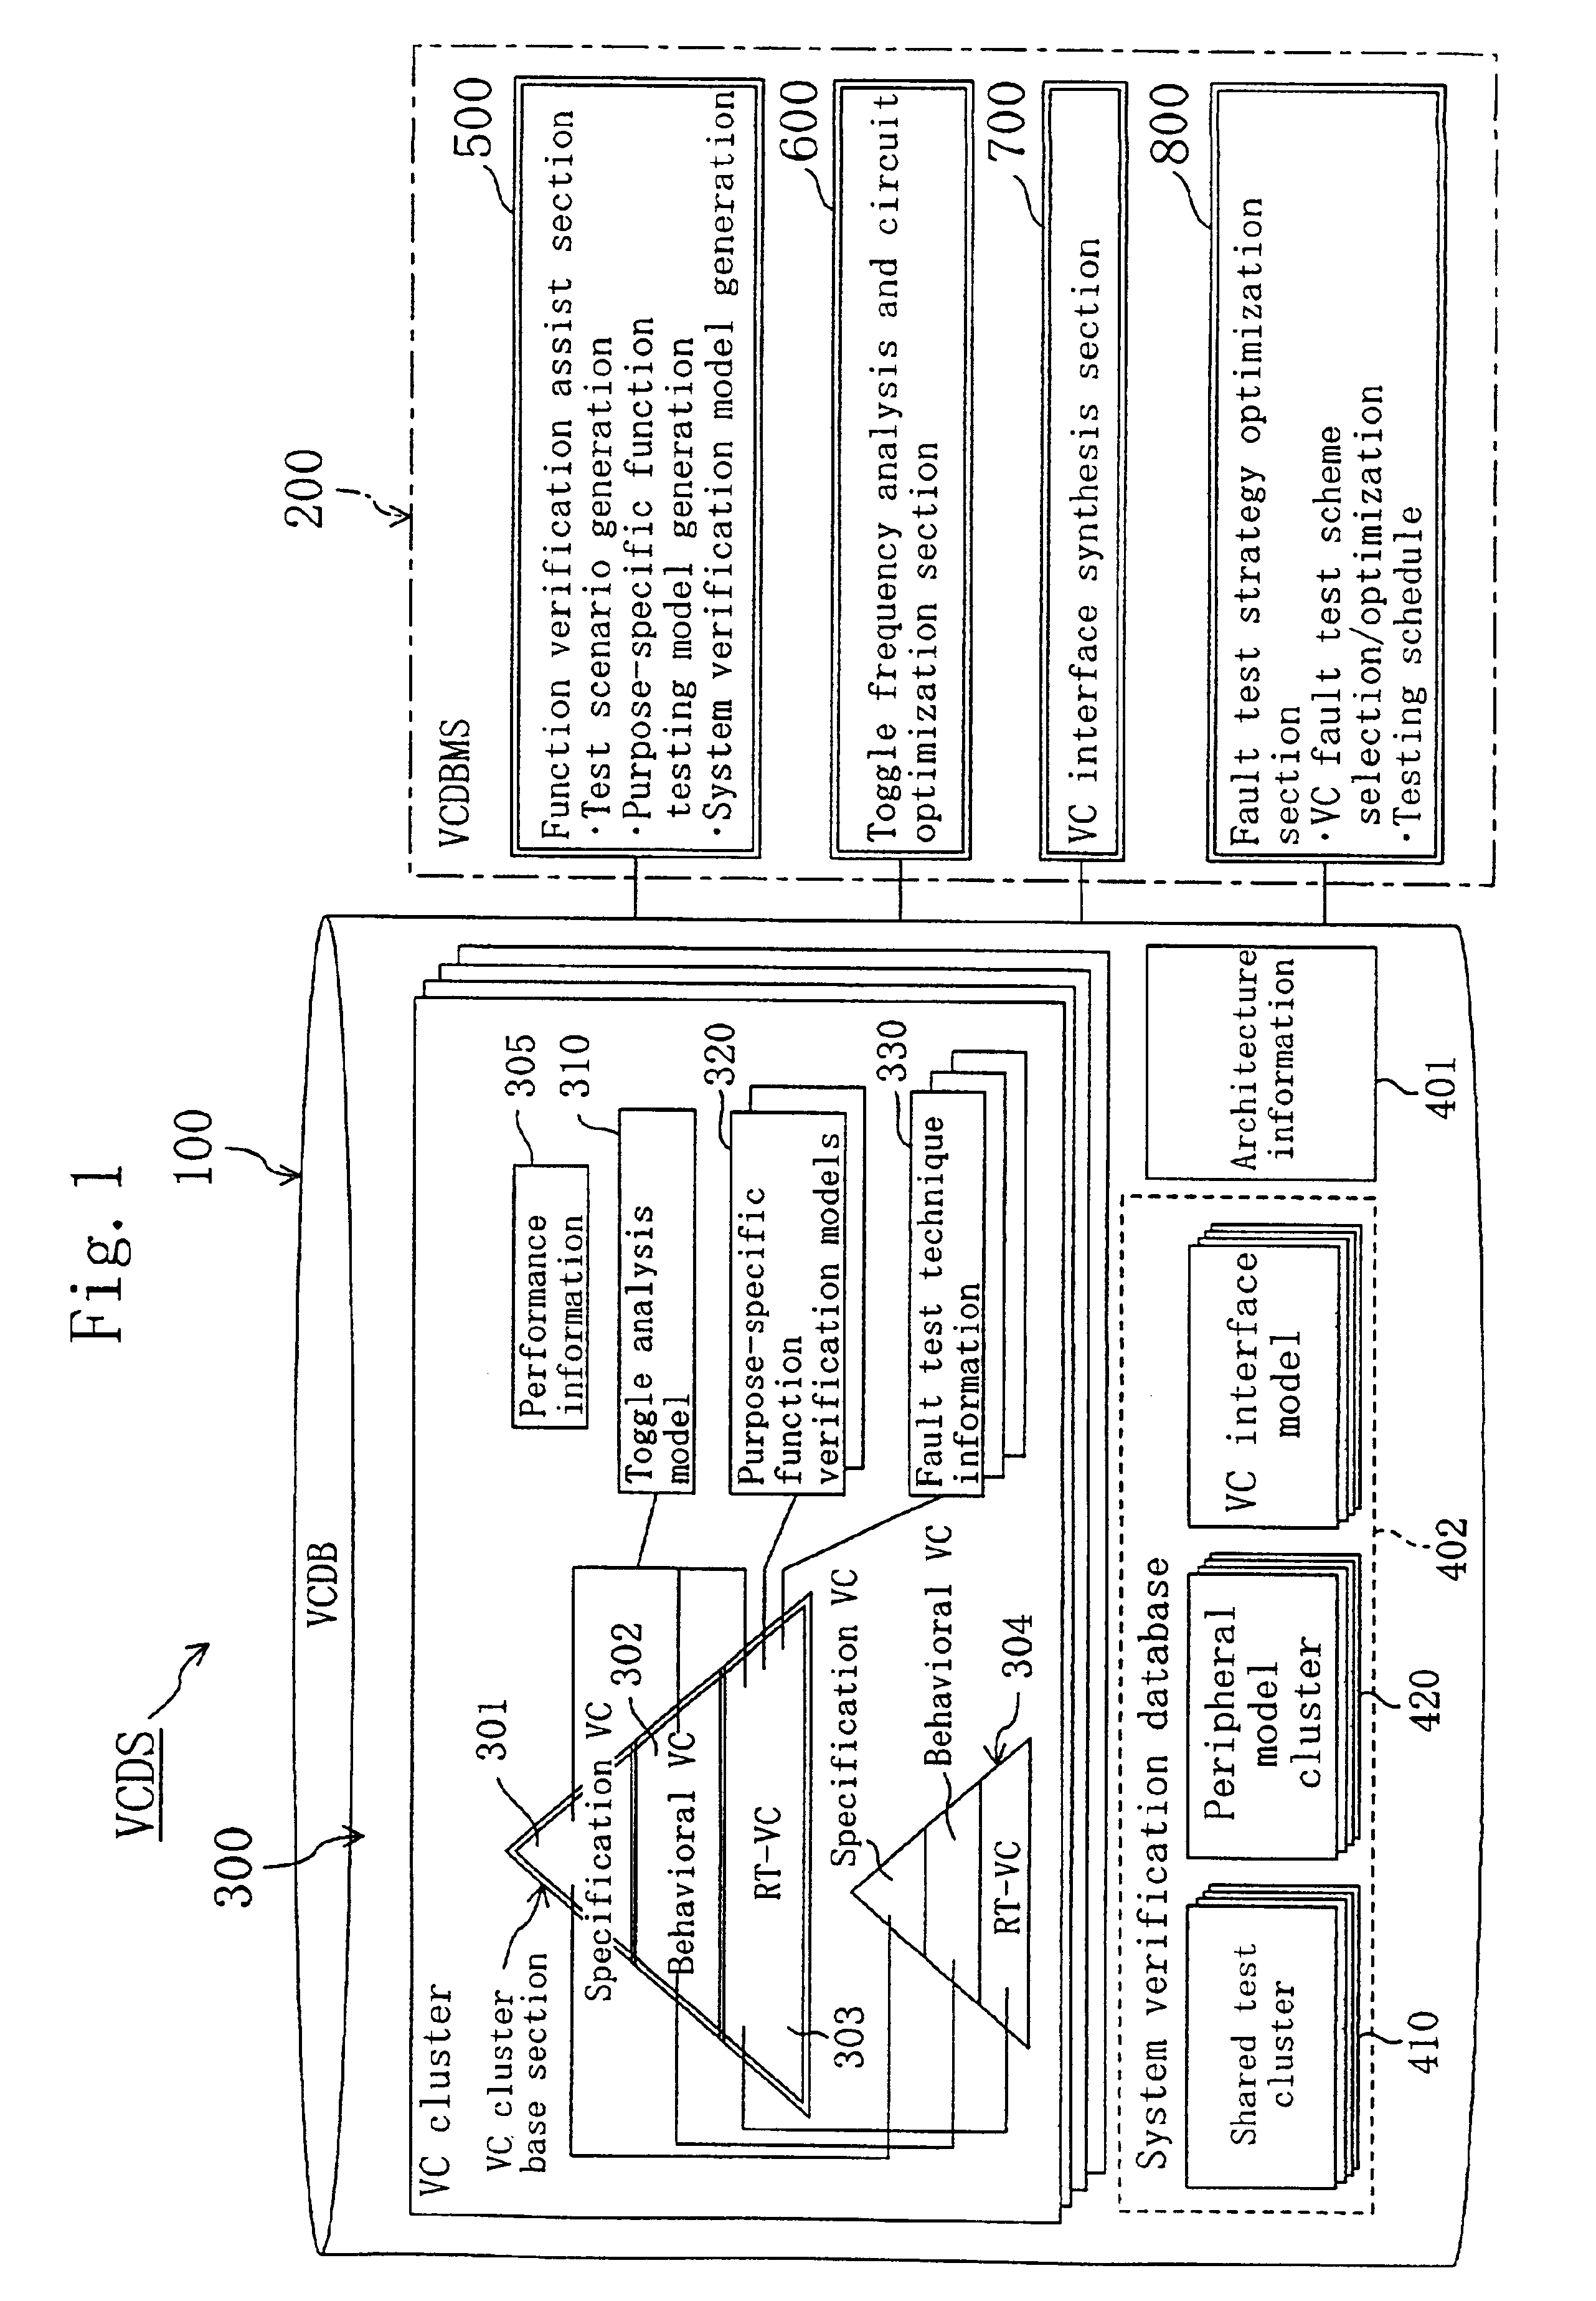 Database for design of integrated circuit device and method for designing integrated circuit device